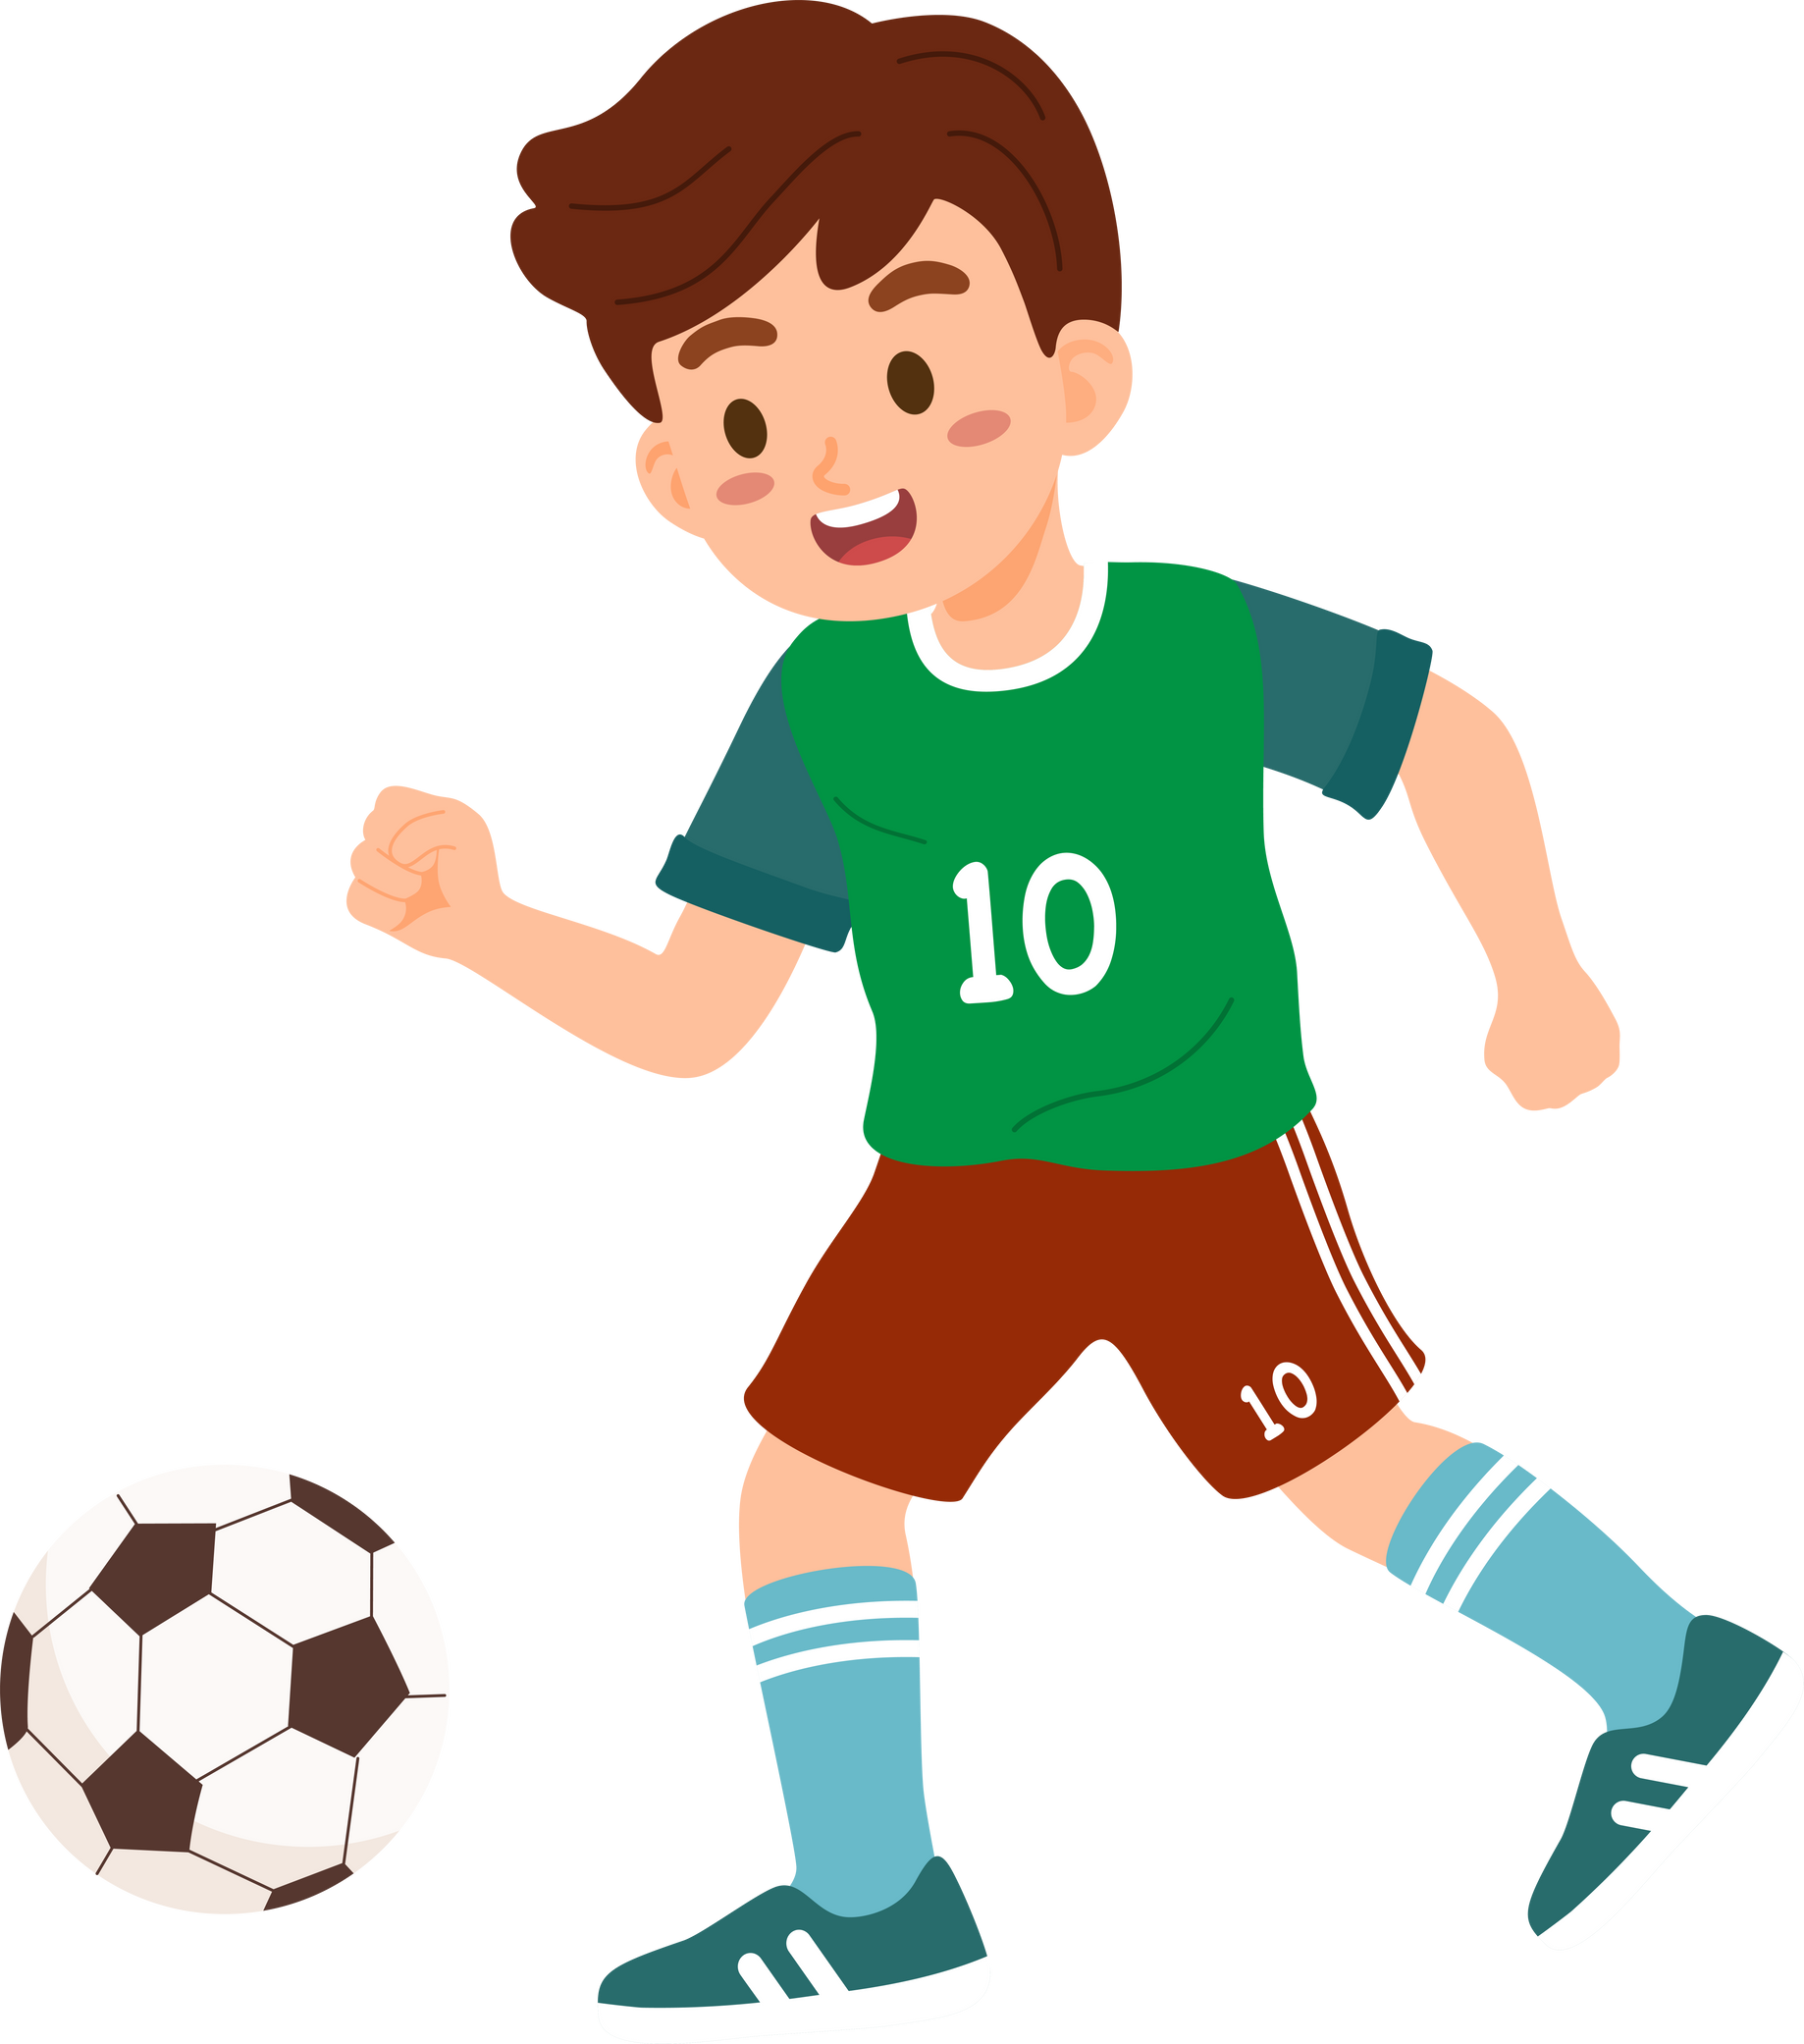 Boy playing soccer football. Sport play for kids exercise concept.